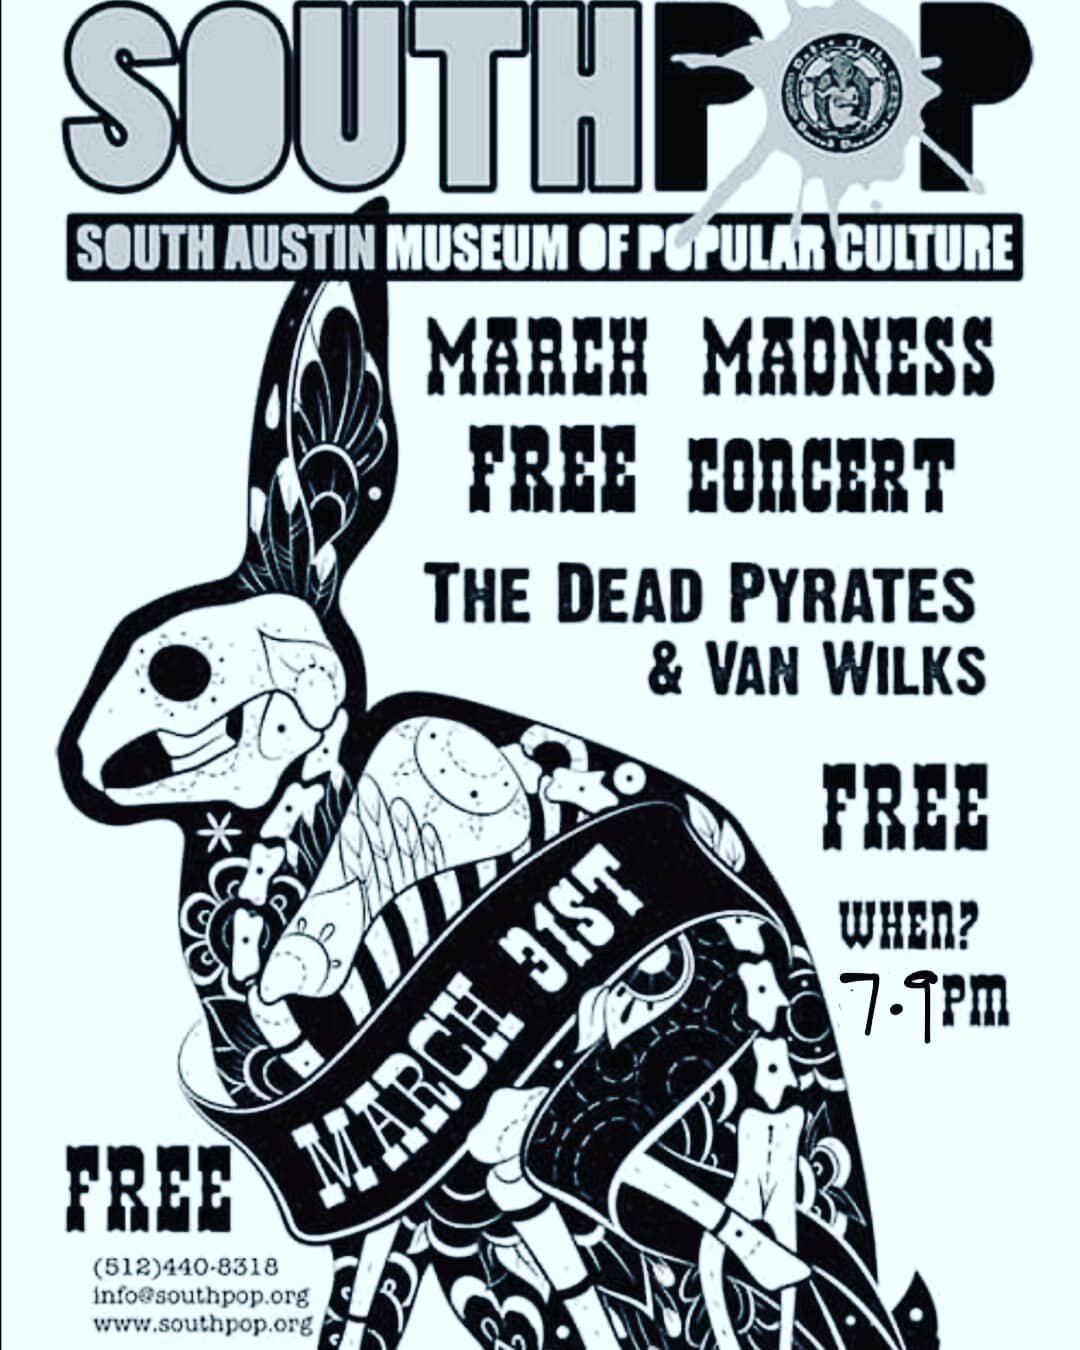 Join us #Sunday March 31 for our #MarchMadness Sunday #Free #Concert! @vanwilks will perform at 7pm followed by #TheDeadPyratesSociety. Did we mention it's FREE?
.
#Livemusic #music #freemusic #freeconcert #freeinatx #freestufftodo #local #localbands